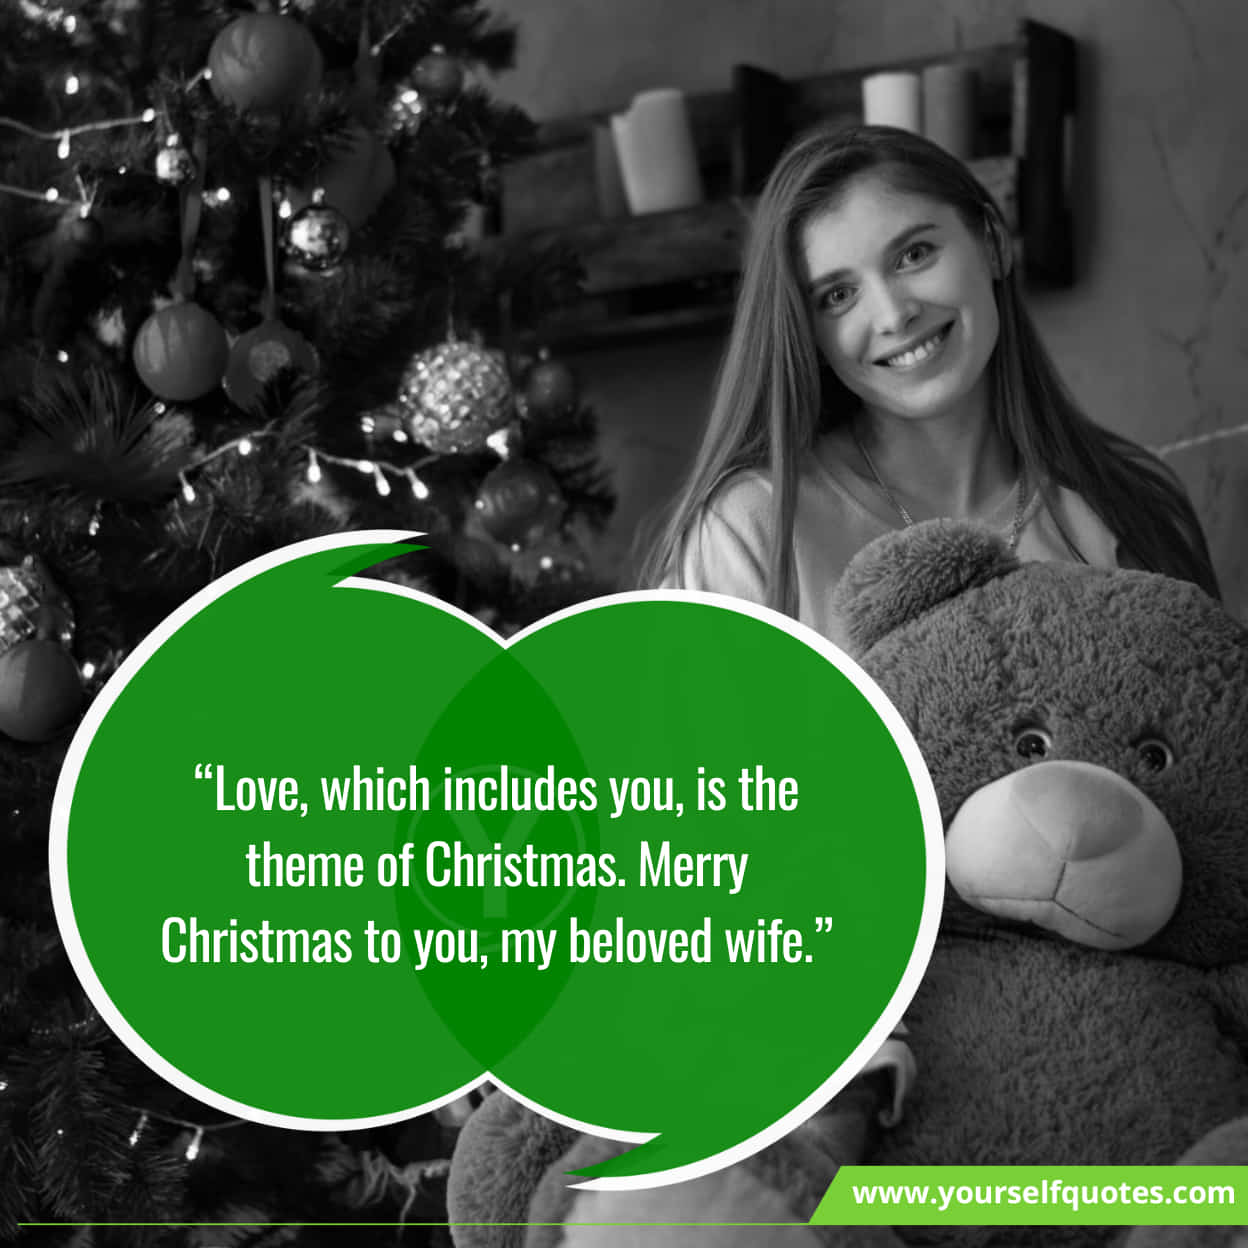 Best Romantic Merry Christmas Wishe for Wife